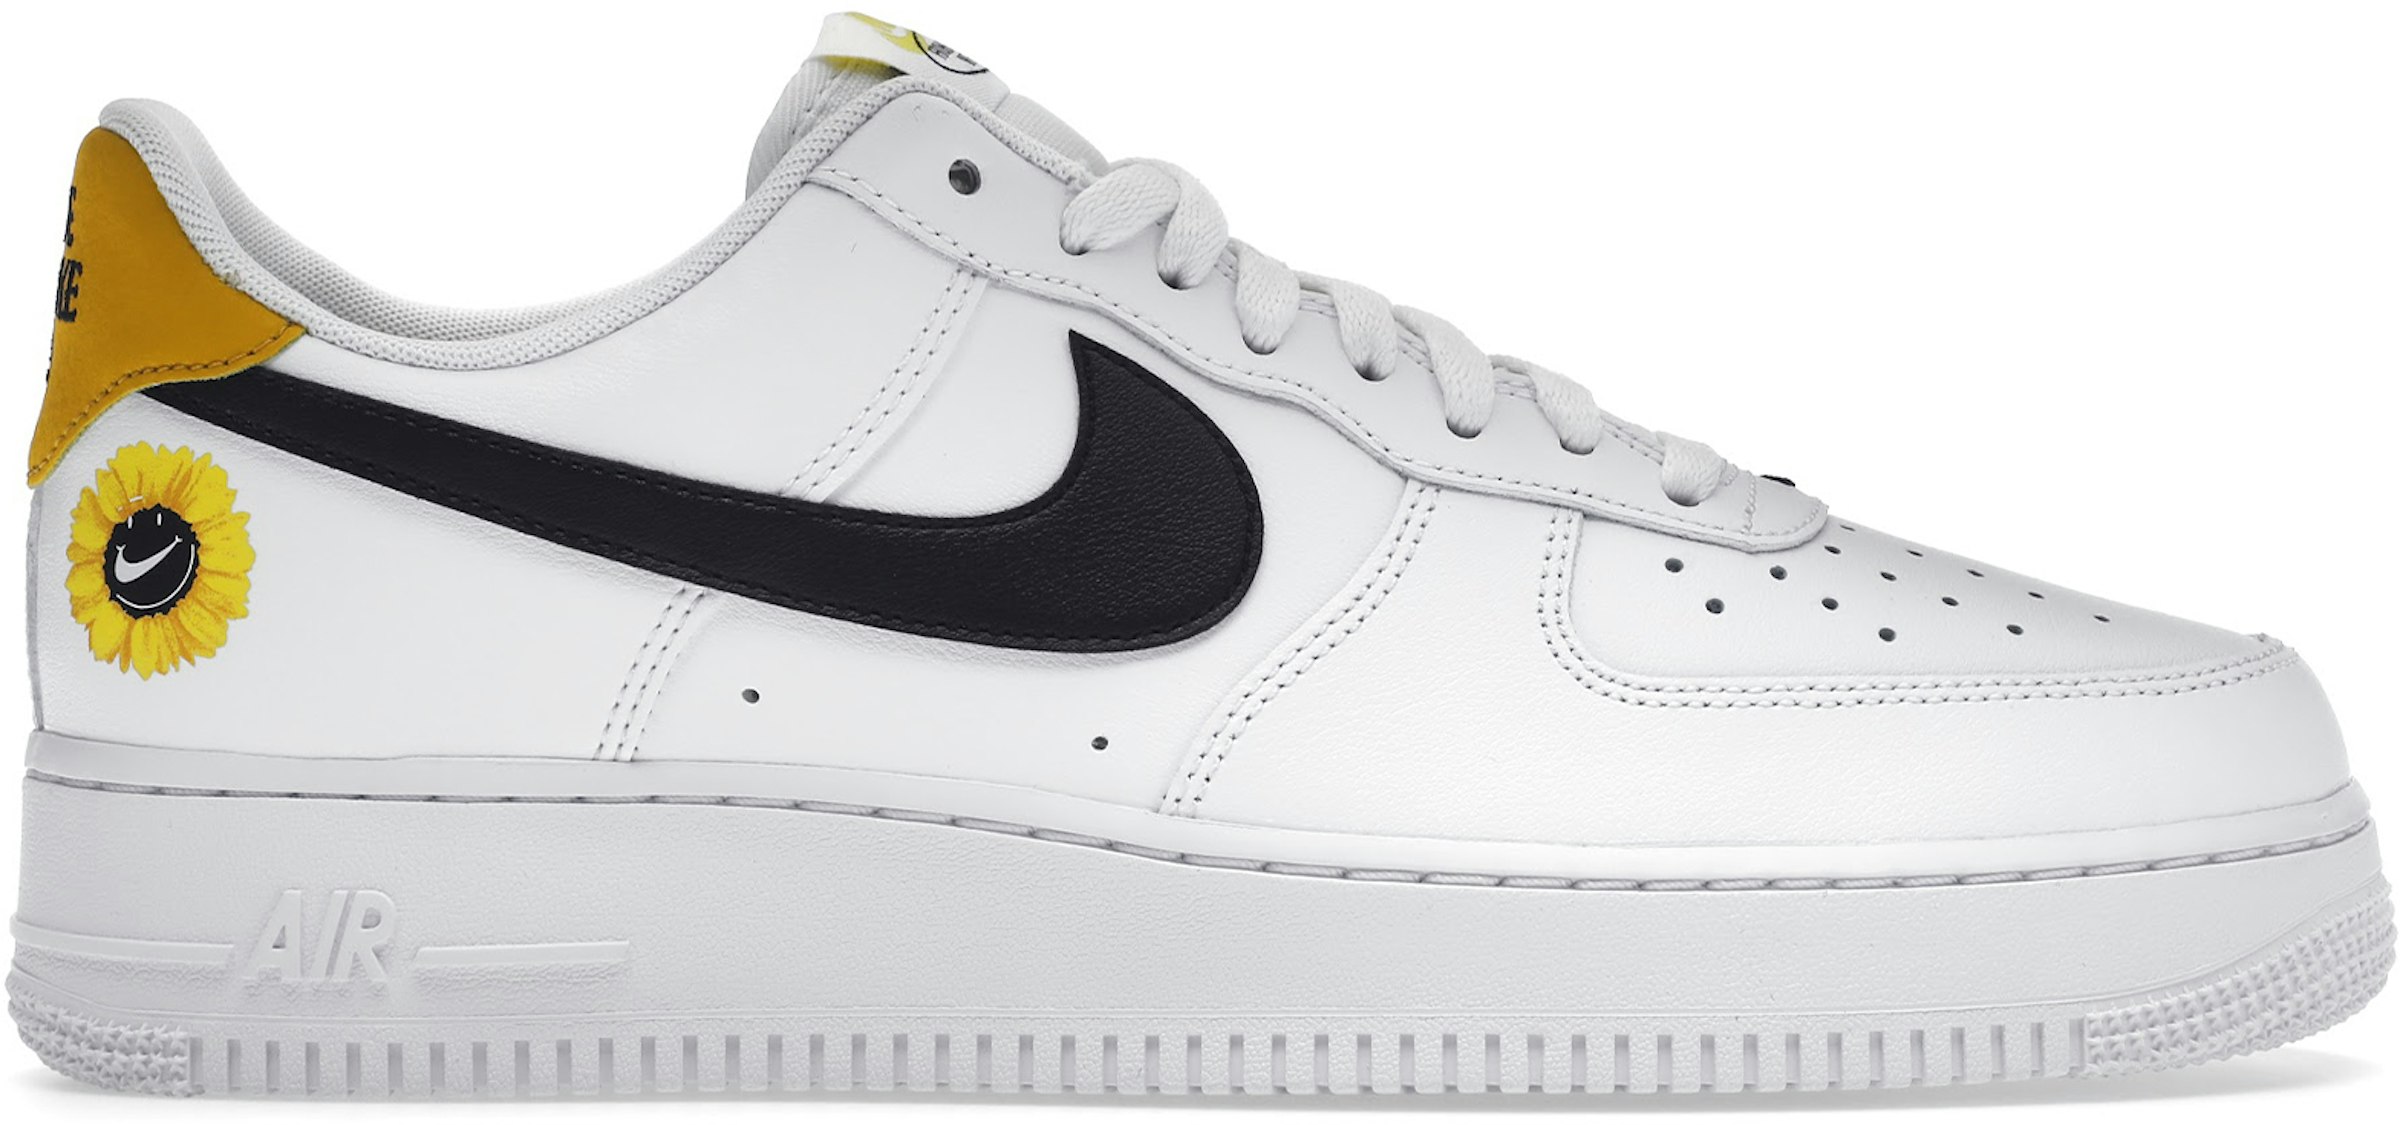 Air Force 1 Low Have a Day White Gold Men's - DM0118-100 -